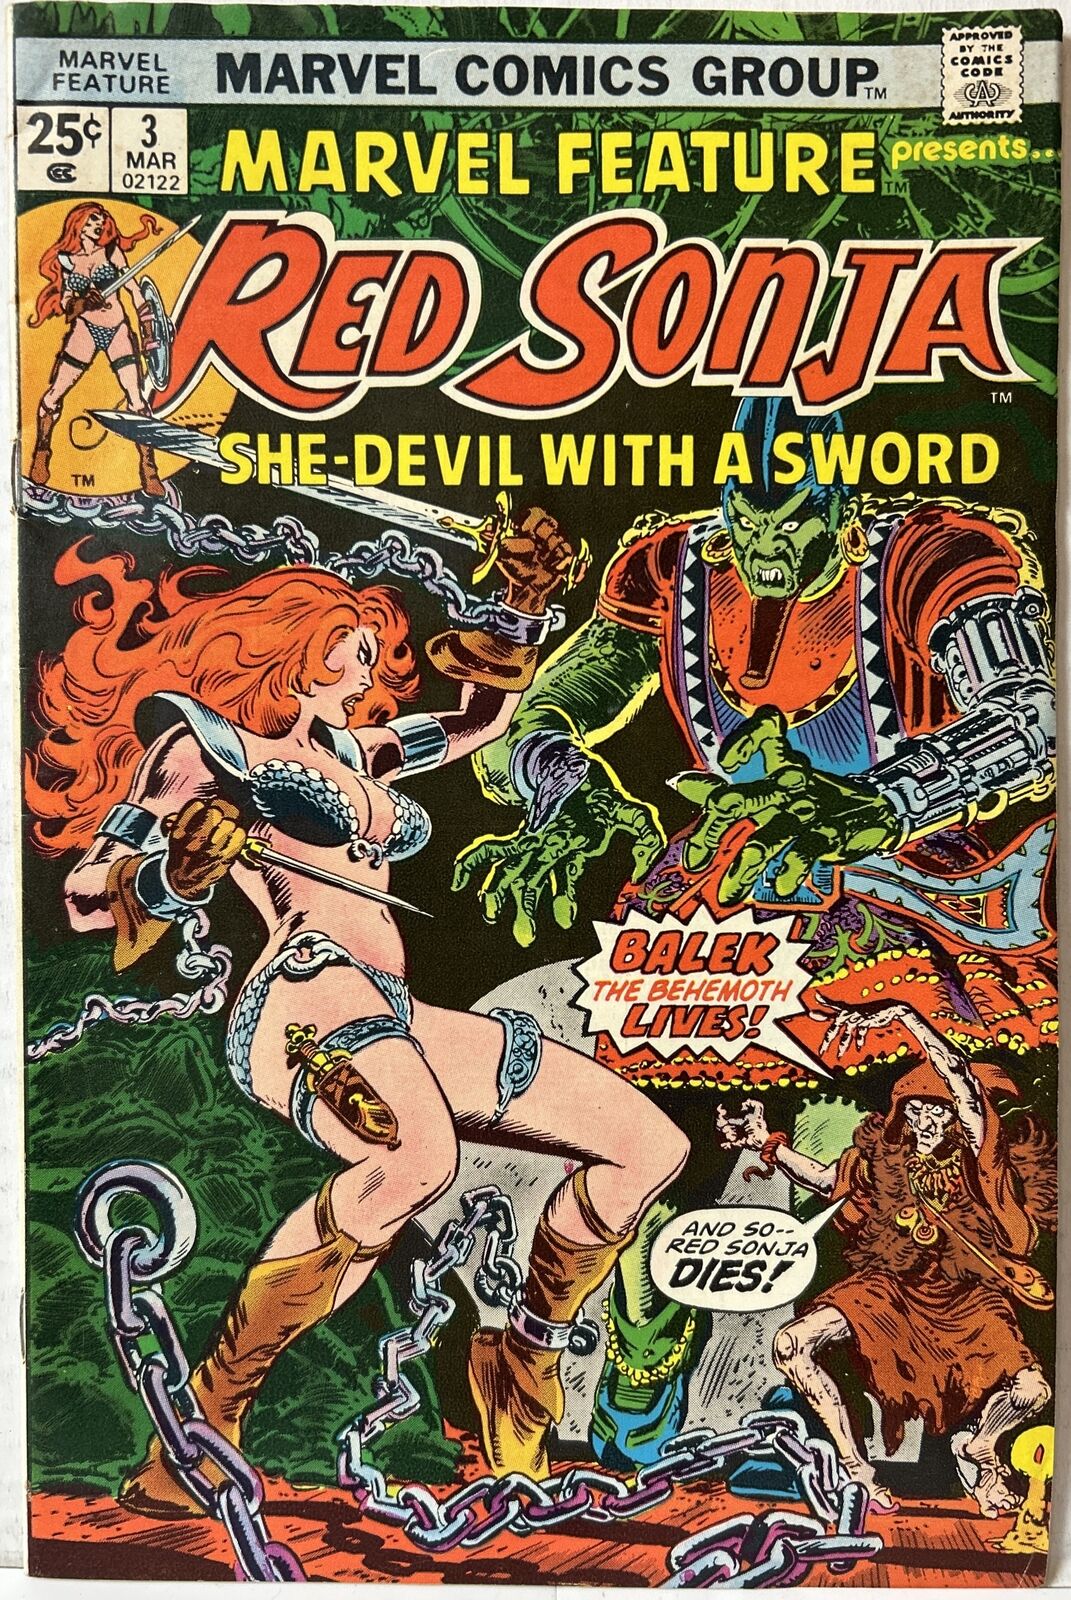 Marvel Feature #3 Red Sonja March 1976 Comic Frank Thorne FN MVS Intact